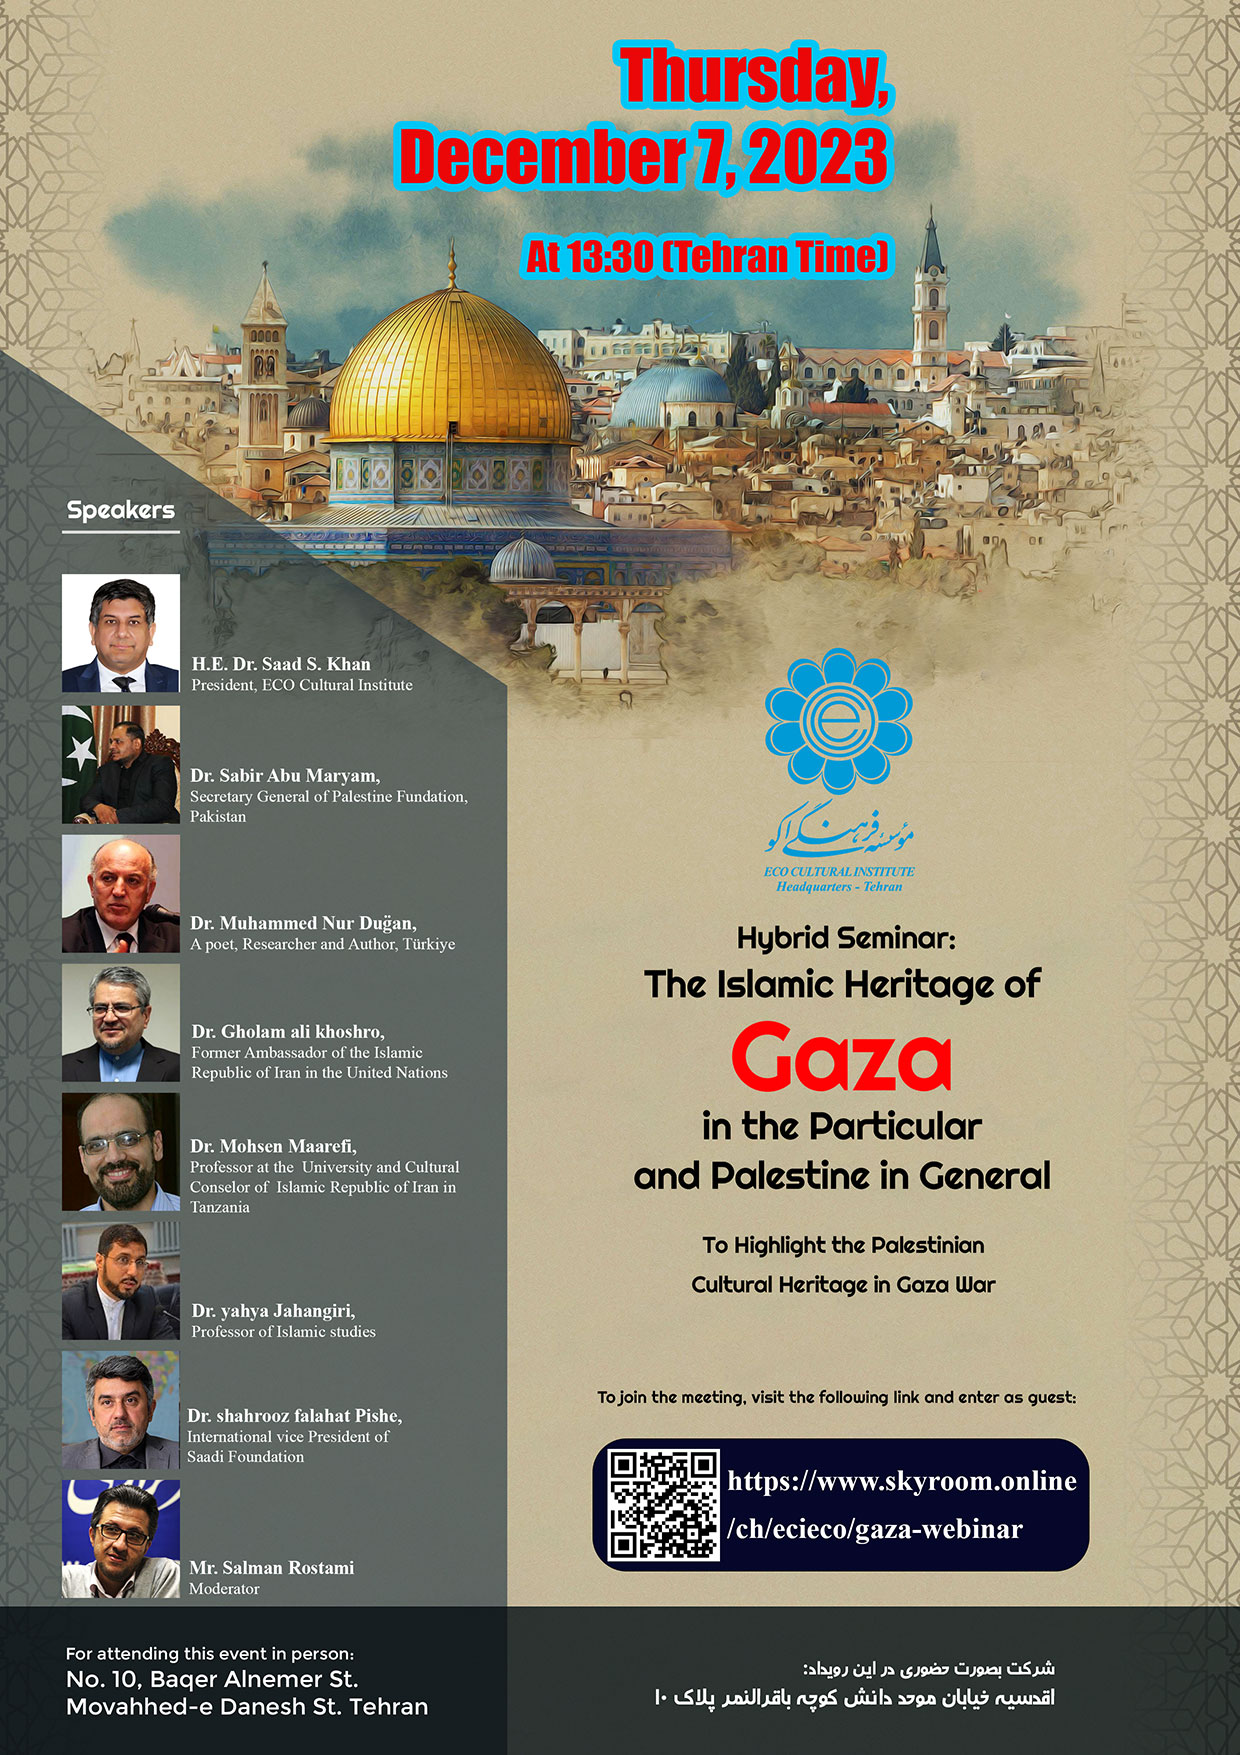 The Islamic Heritage of Gaza in Particular and Palestine in General